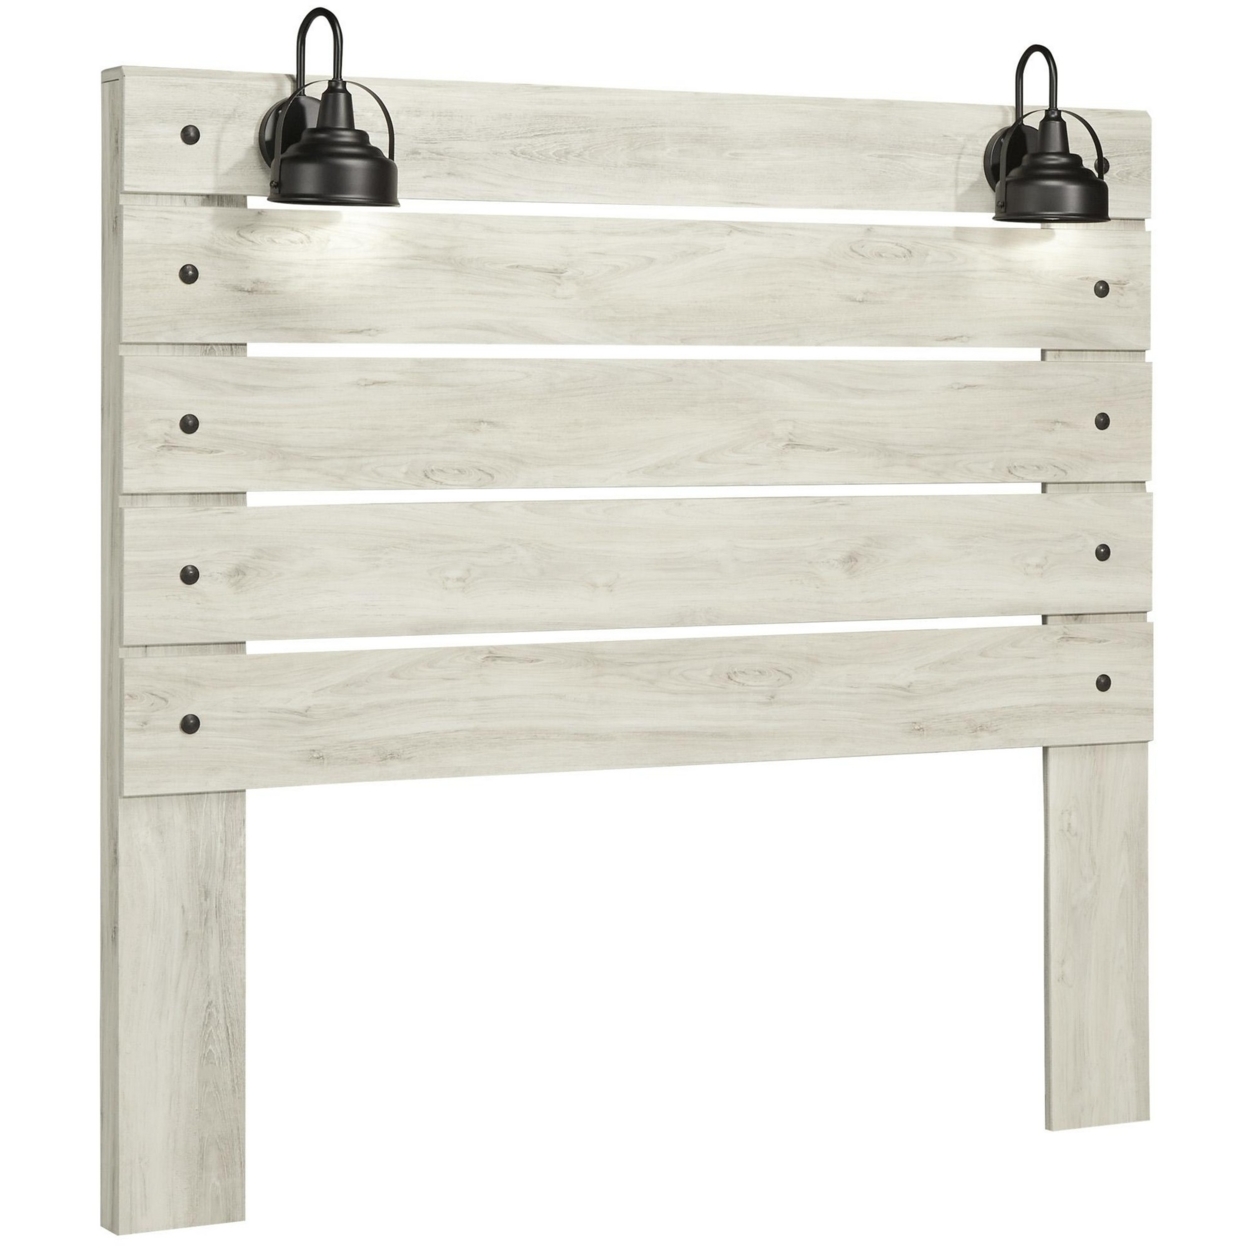 Transitional Wooden Queen Panel Headboard With Slated Design And Lamp, White- Saltoro Sherpi